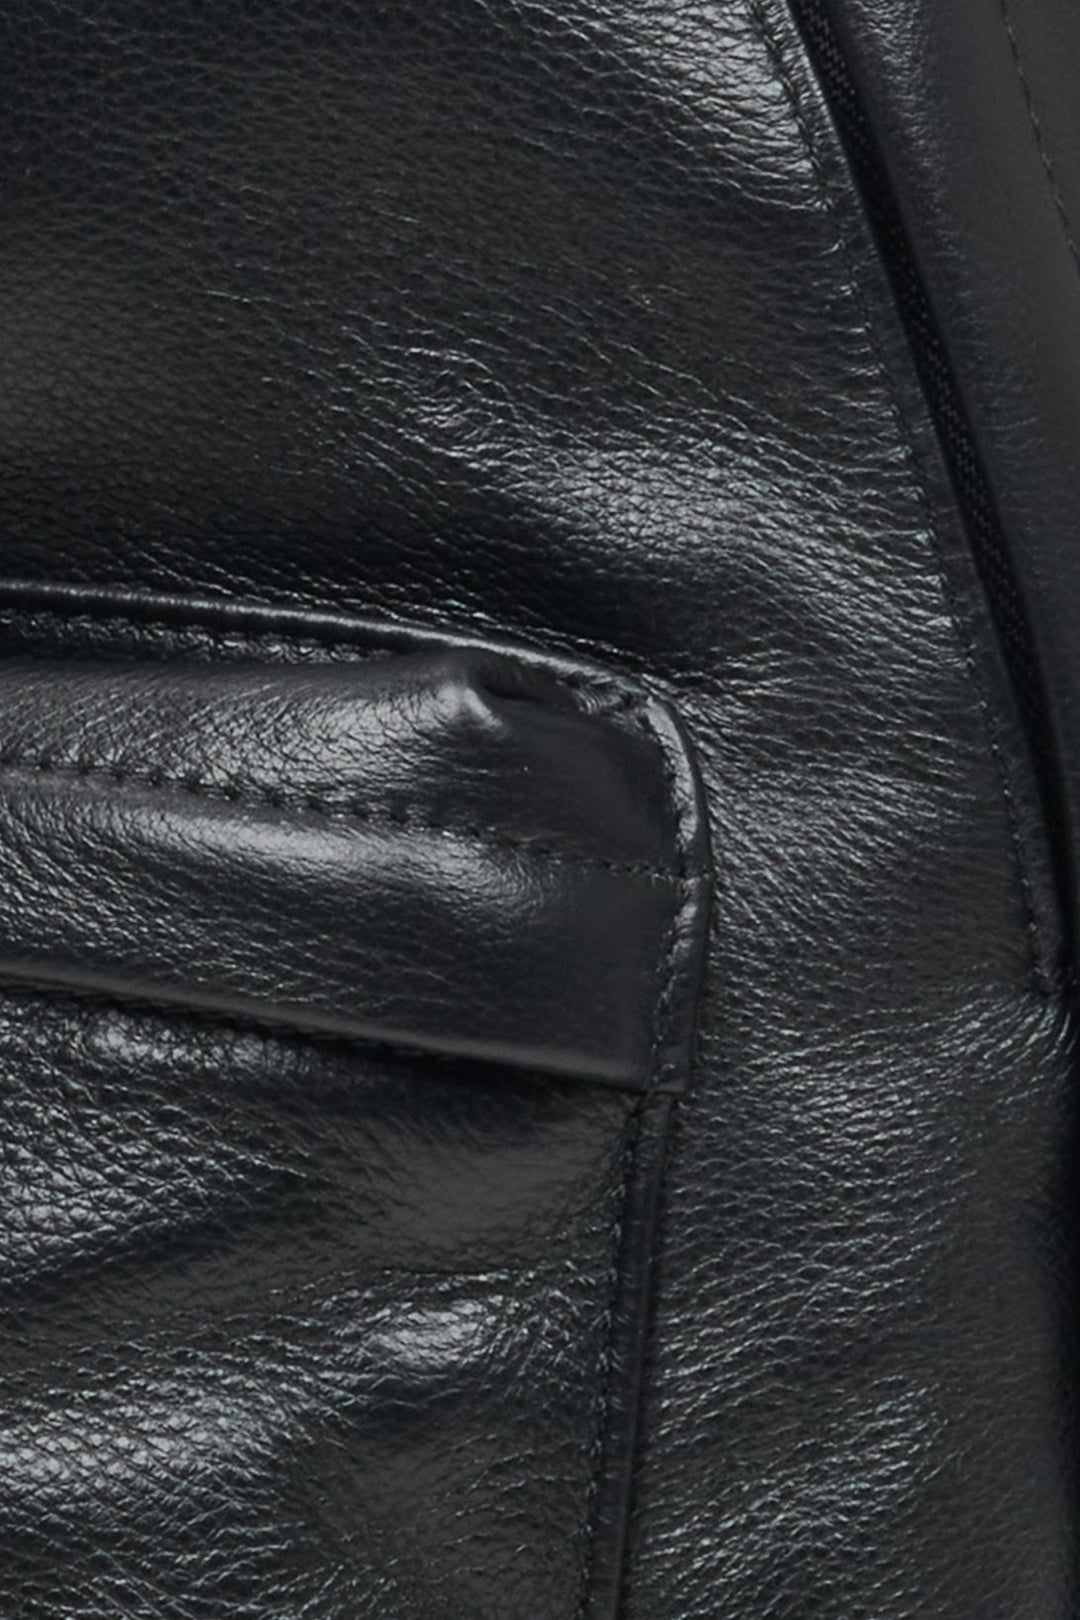 Large women's black backpack made of genuine leather by Estro - close-up of the details.